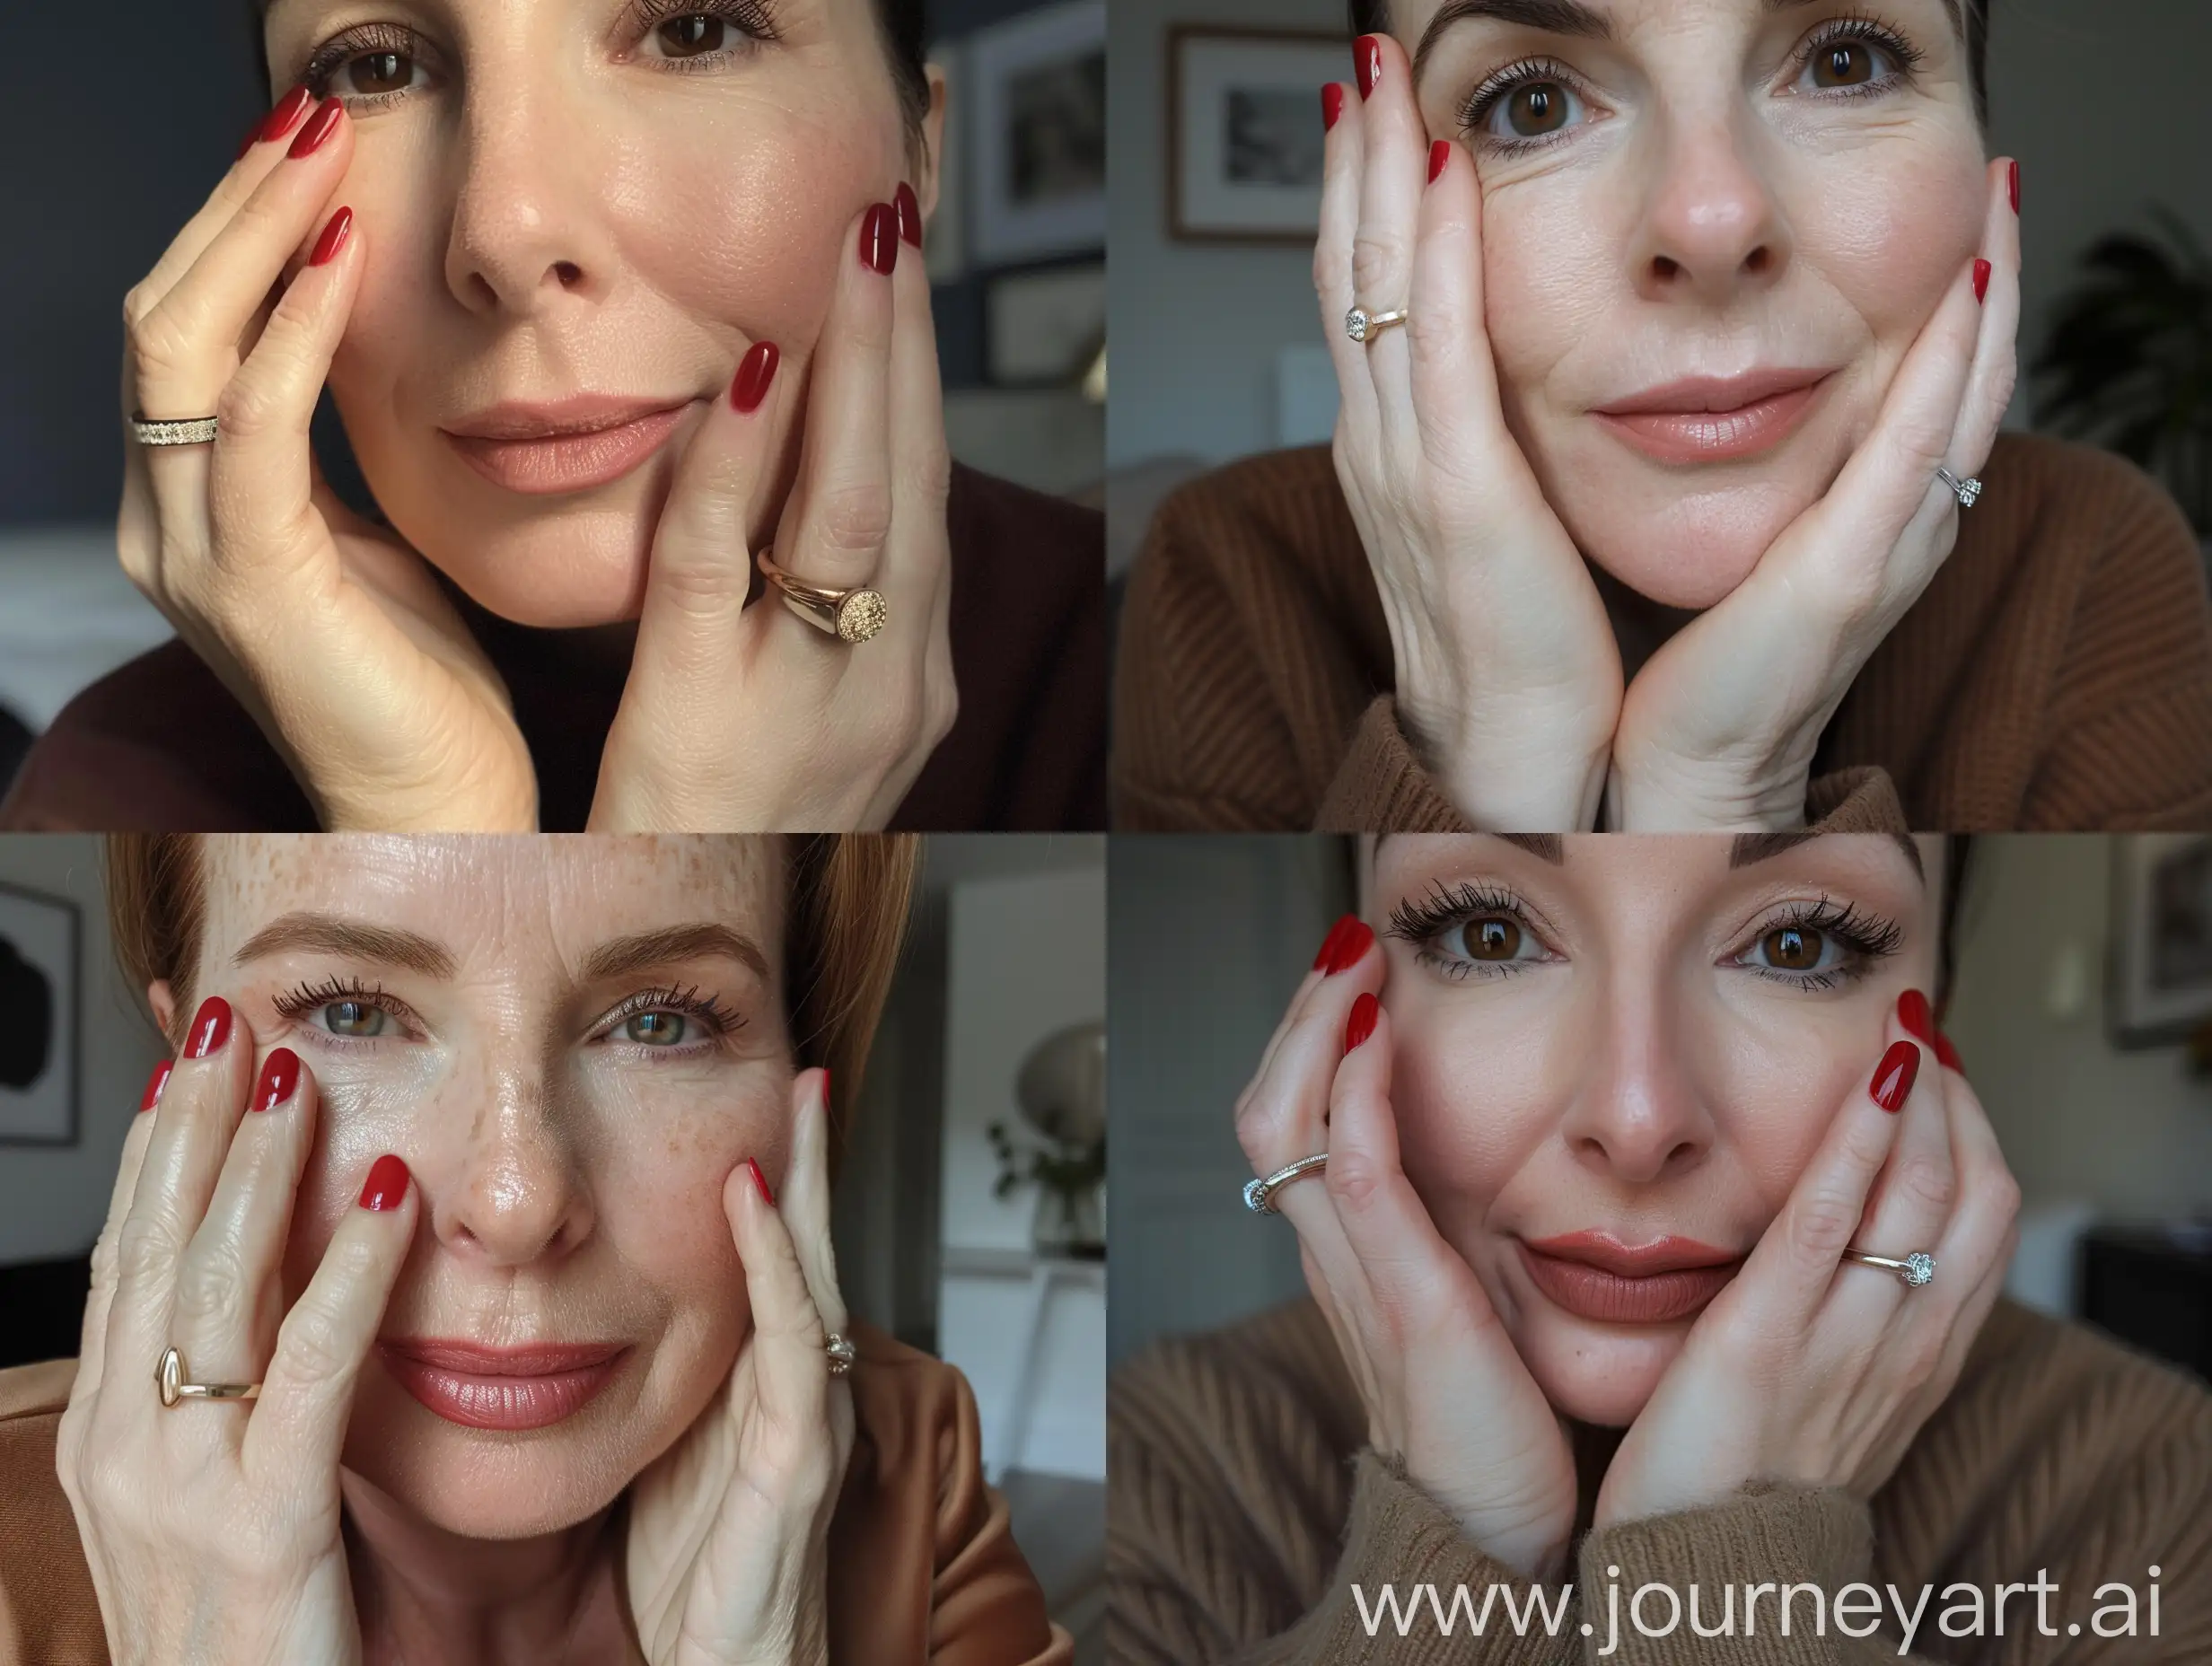 Stylish-London-Mothers-Selfie-with-Matte-Brown-Makeup-and-Red-Gel-Nails